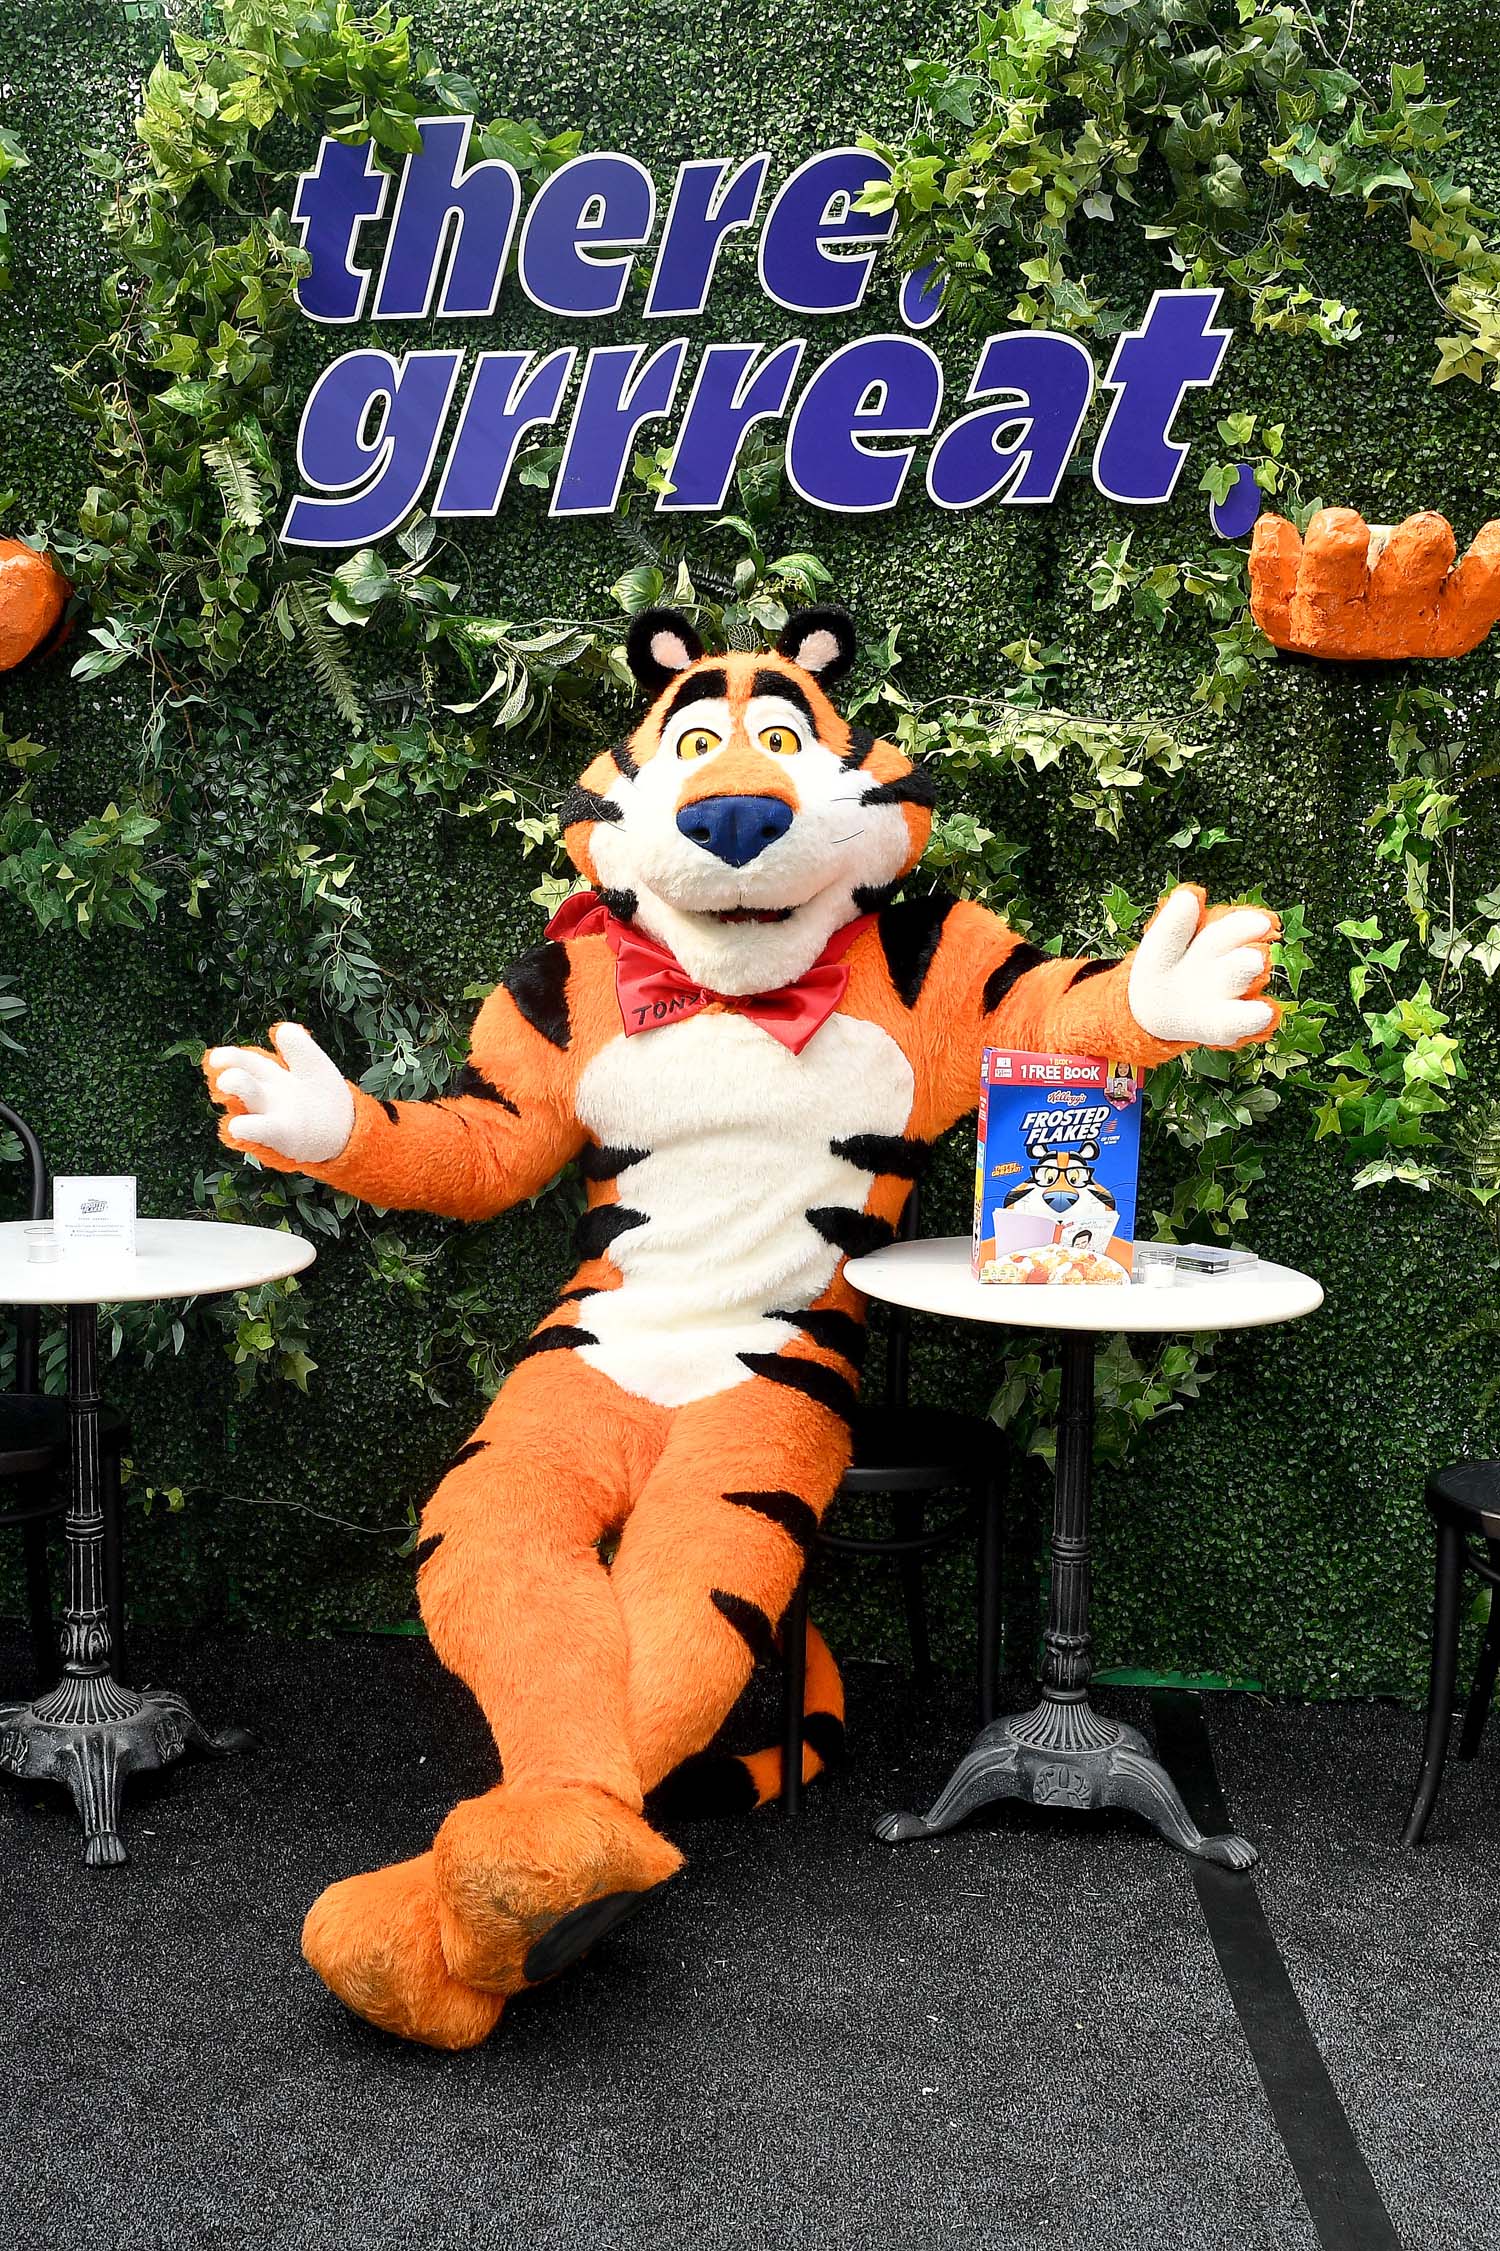 For the First Time Ever, Tony the Tiger® is Going to The Tony Awards®